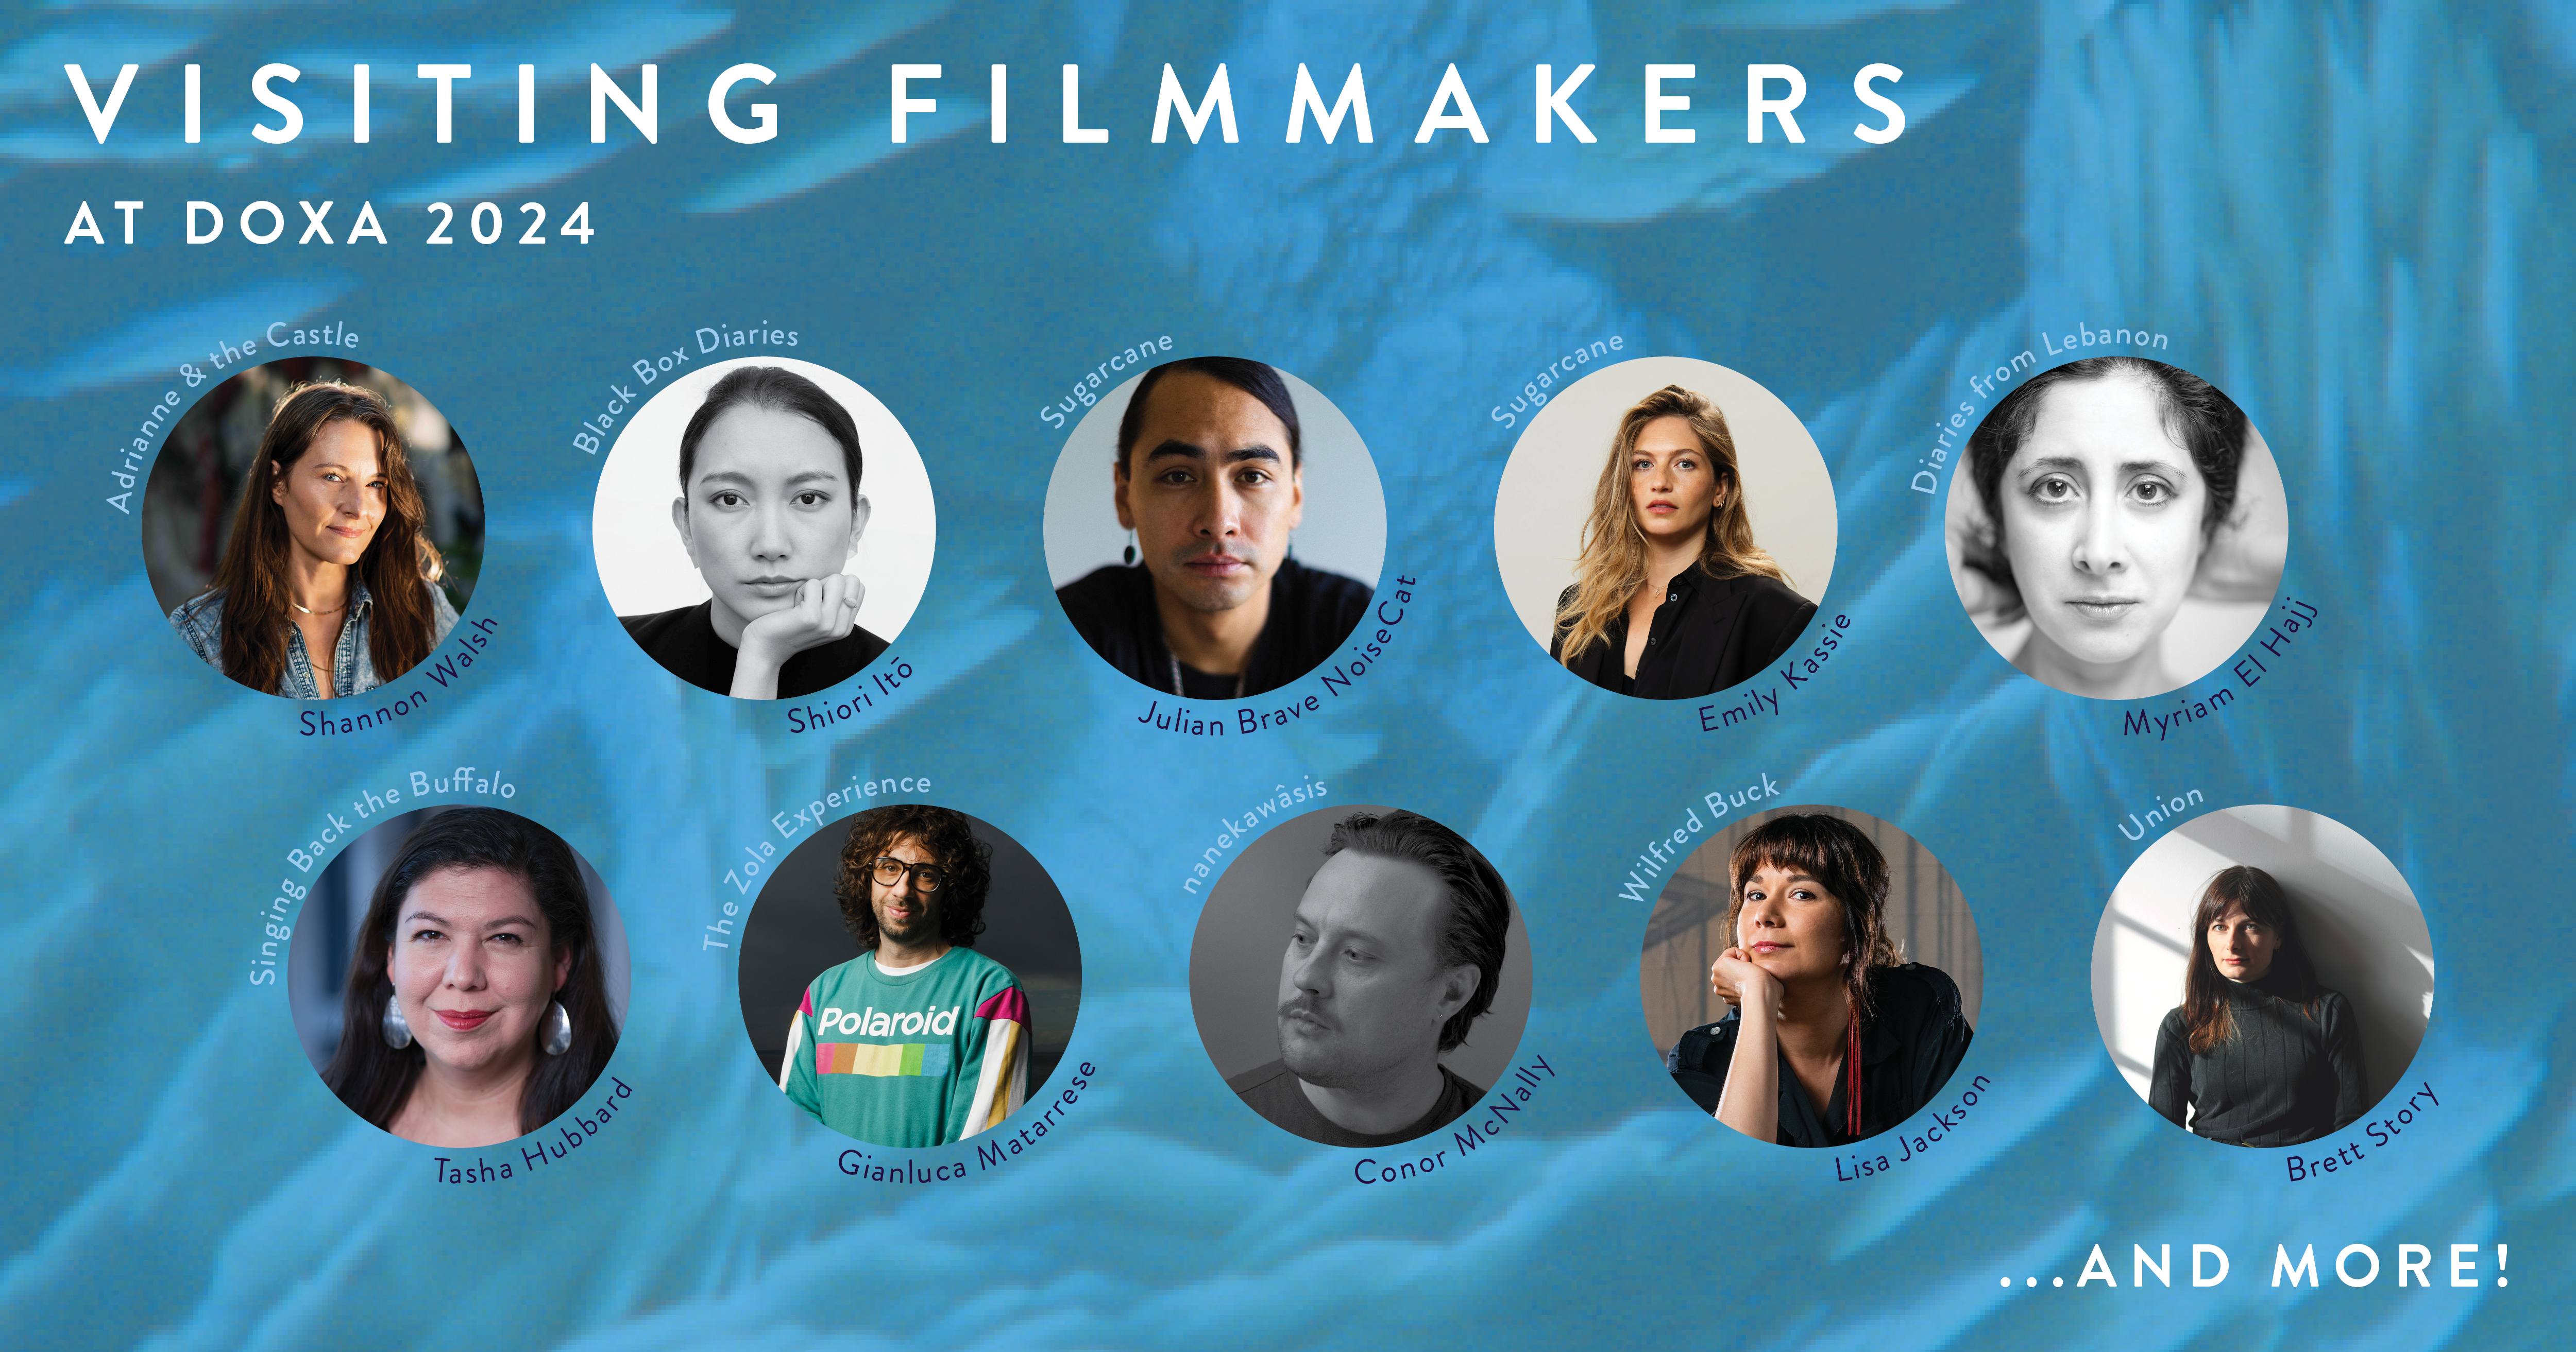 White text reads "Visiting Filmmakers at DOXA 2024" with ten headshots of filmmakers staggered in rows.